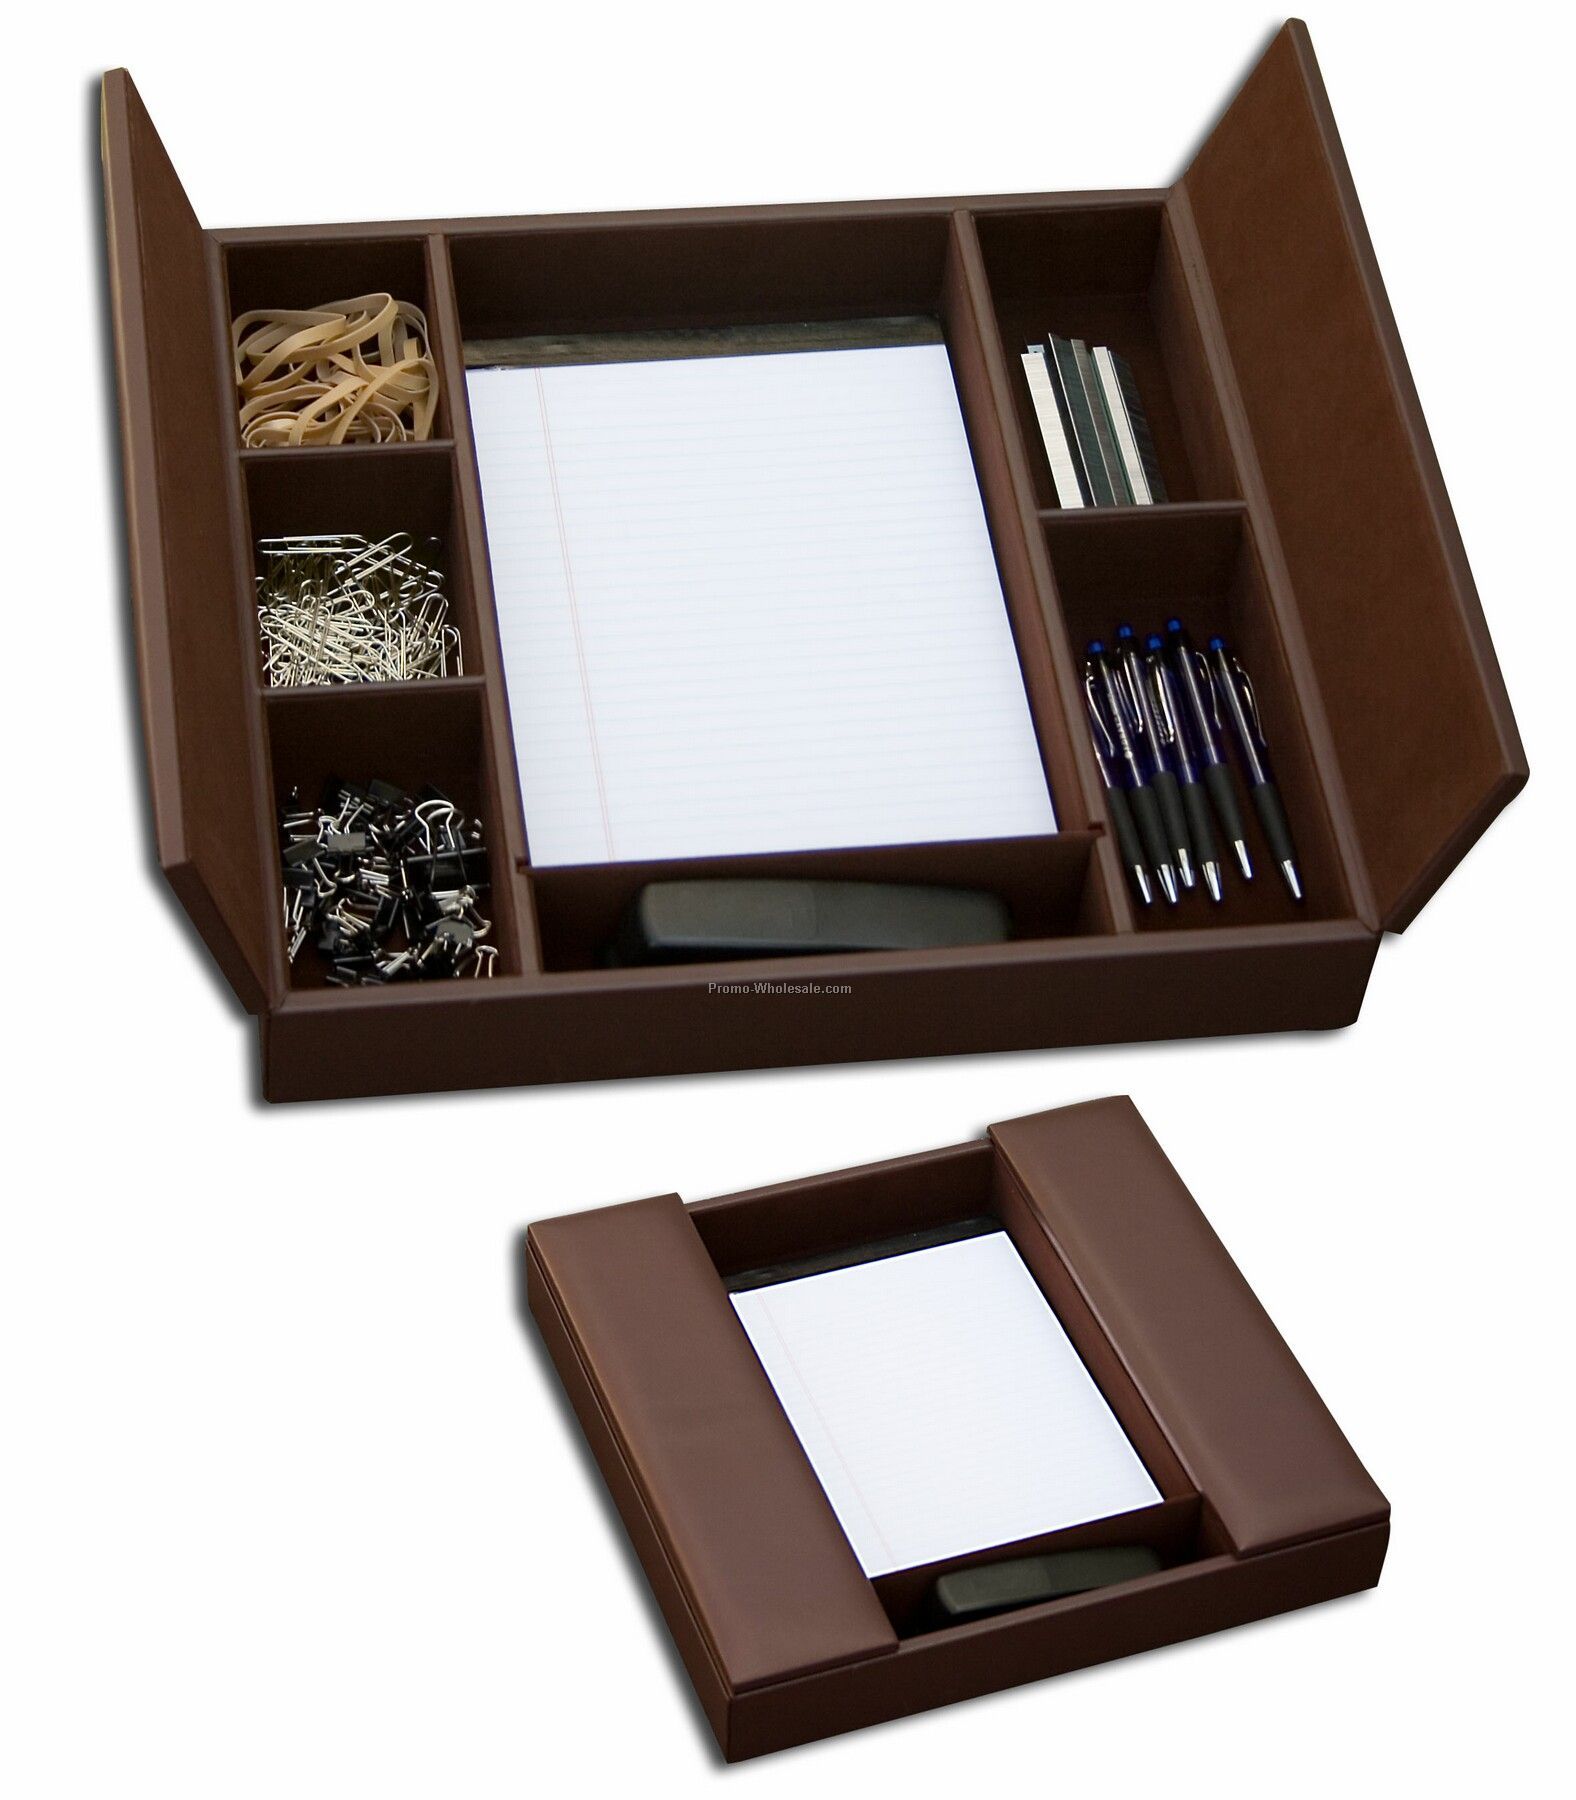 Conference Room Organizer - Chocolate Brown Top Grain Leather